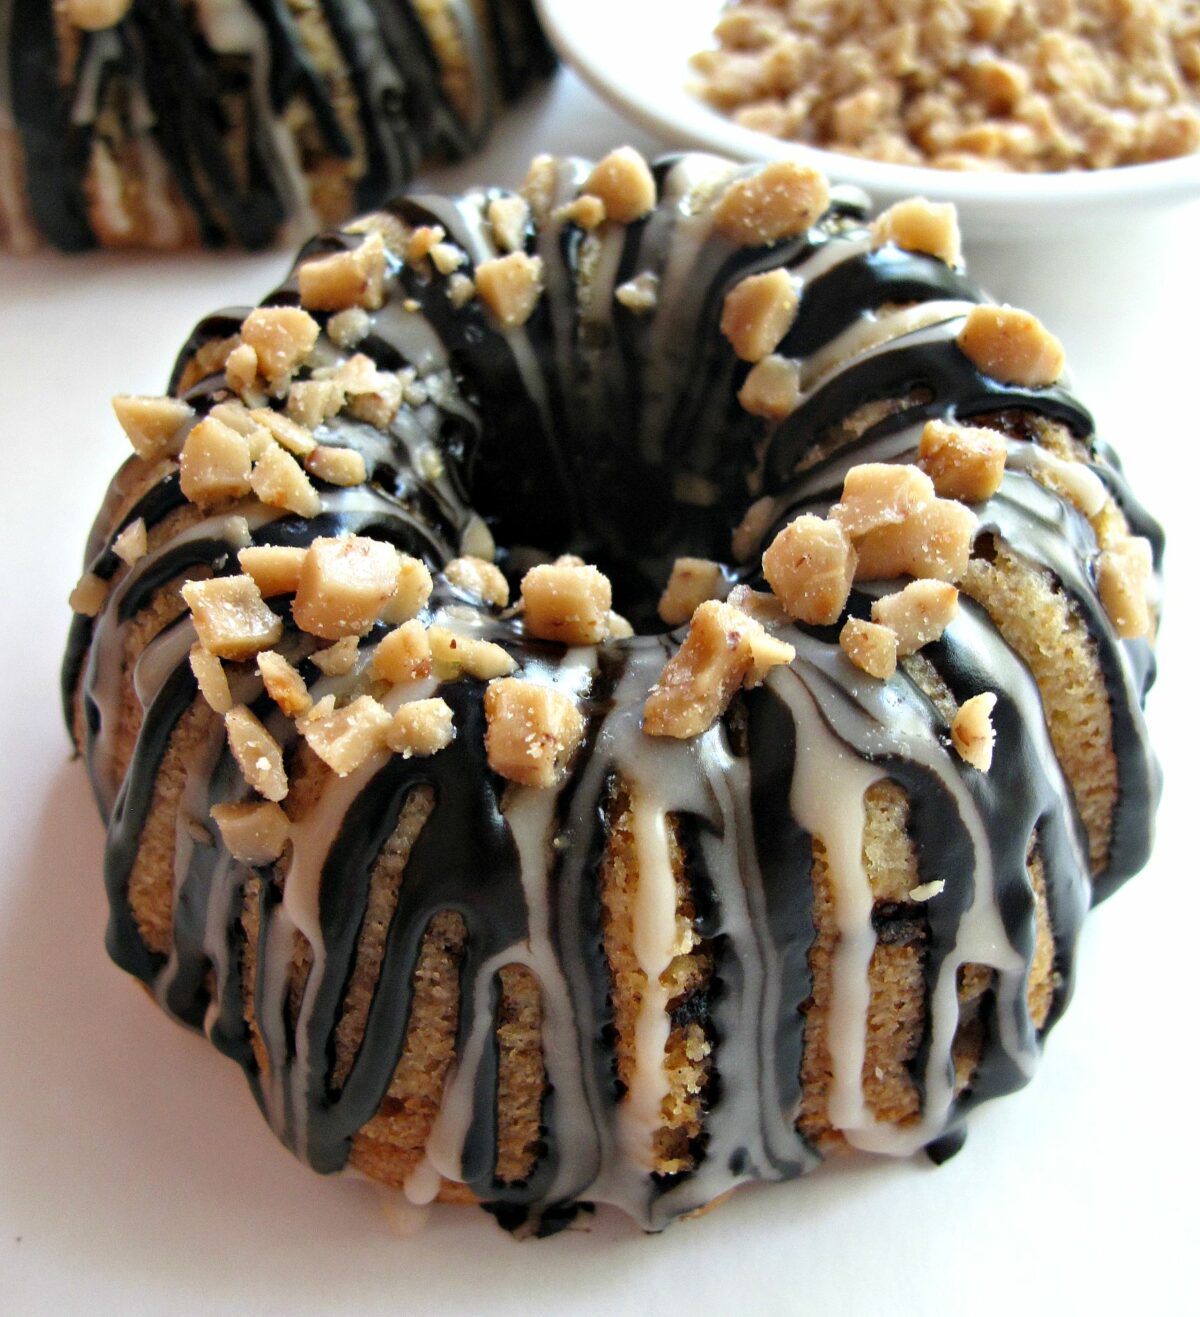 Vanilla Bean Mini-Bundt Cakes with Chocolate-Toffee Crunch close-up showing drizzle and toffee bits.